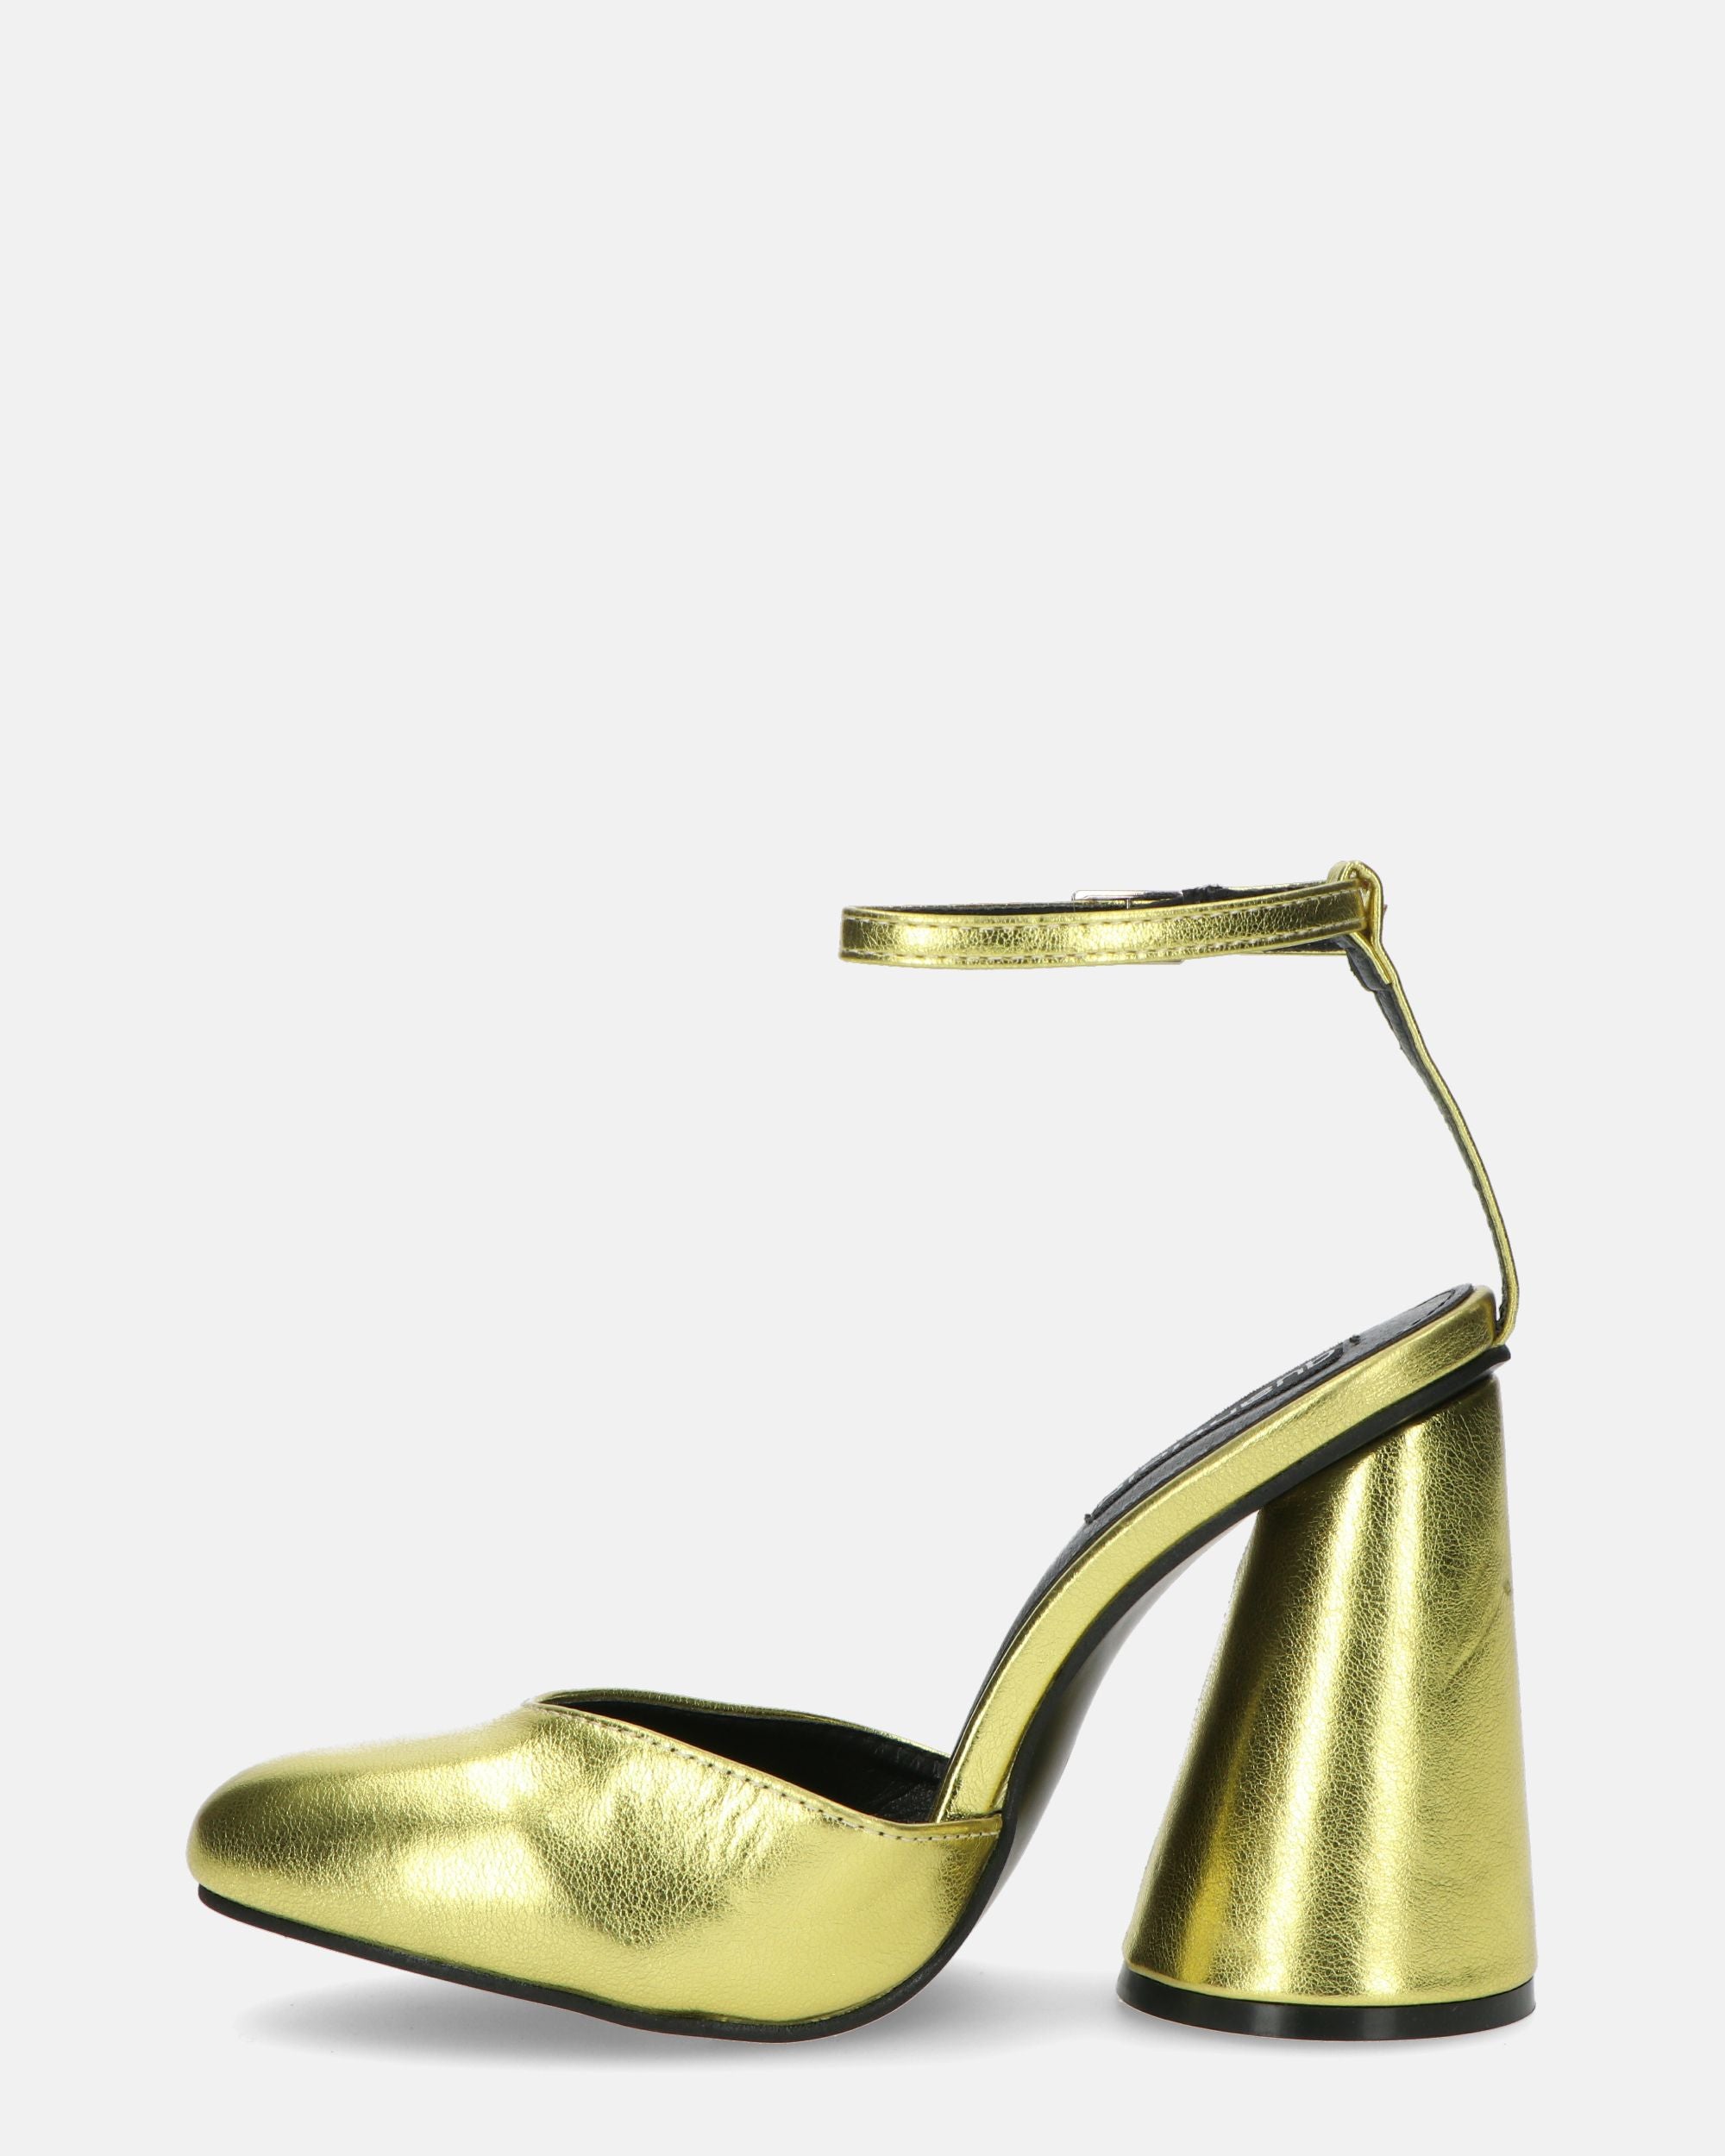 MAYBELLE - golden glassy sandals with cylindrical heel